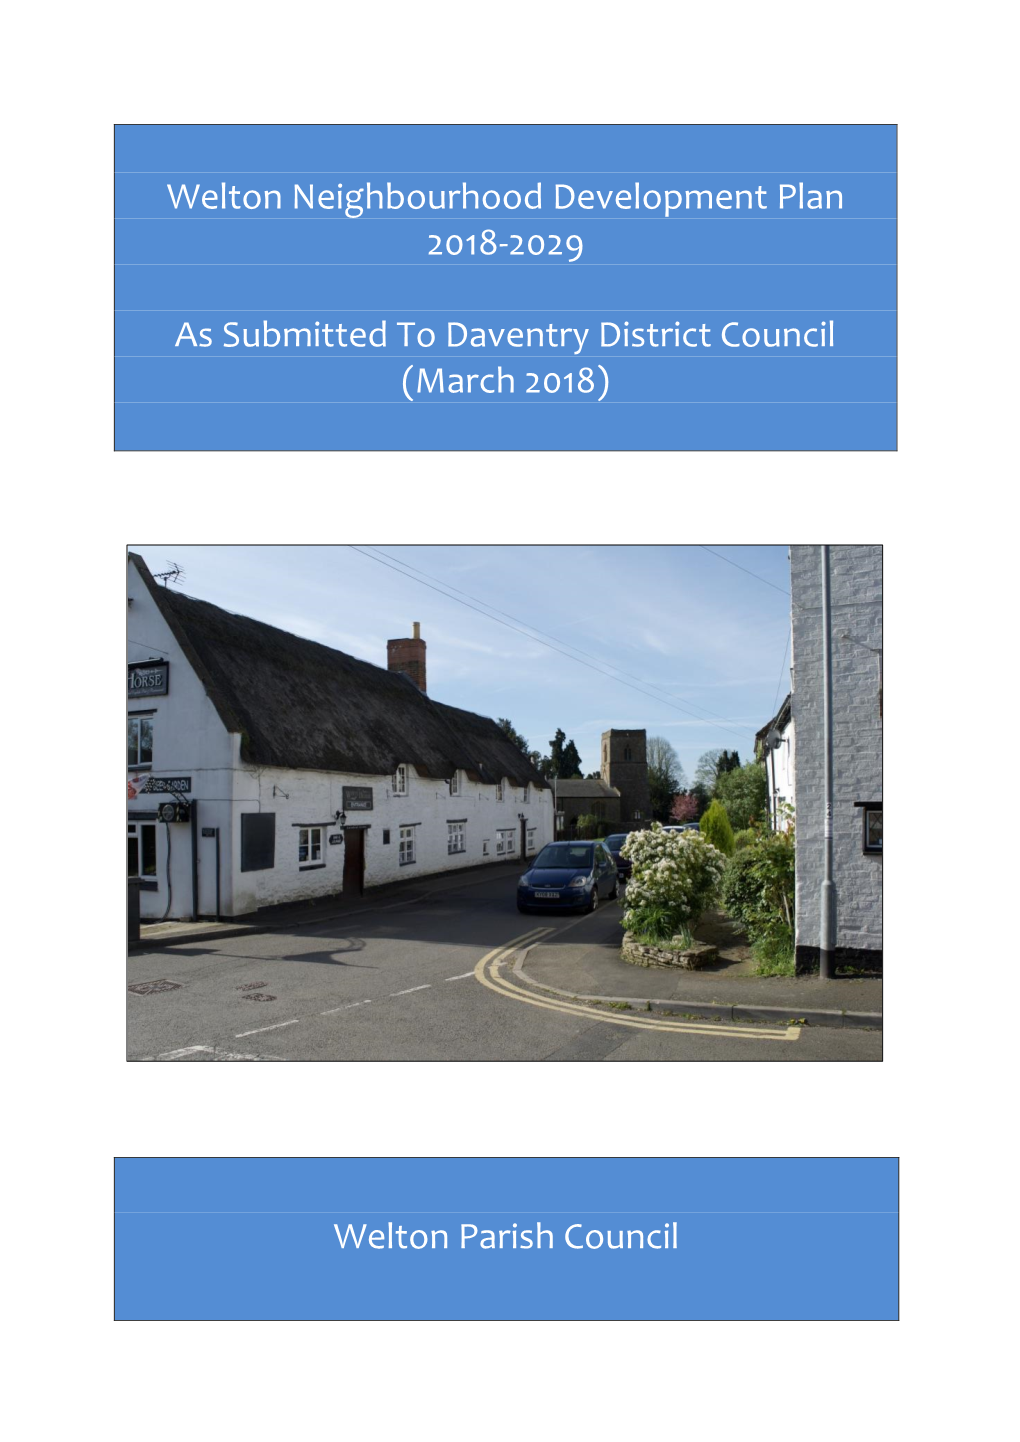 Welton Neighbourhood Development Plan 2018-2029 As Submitted To